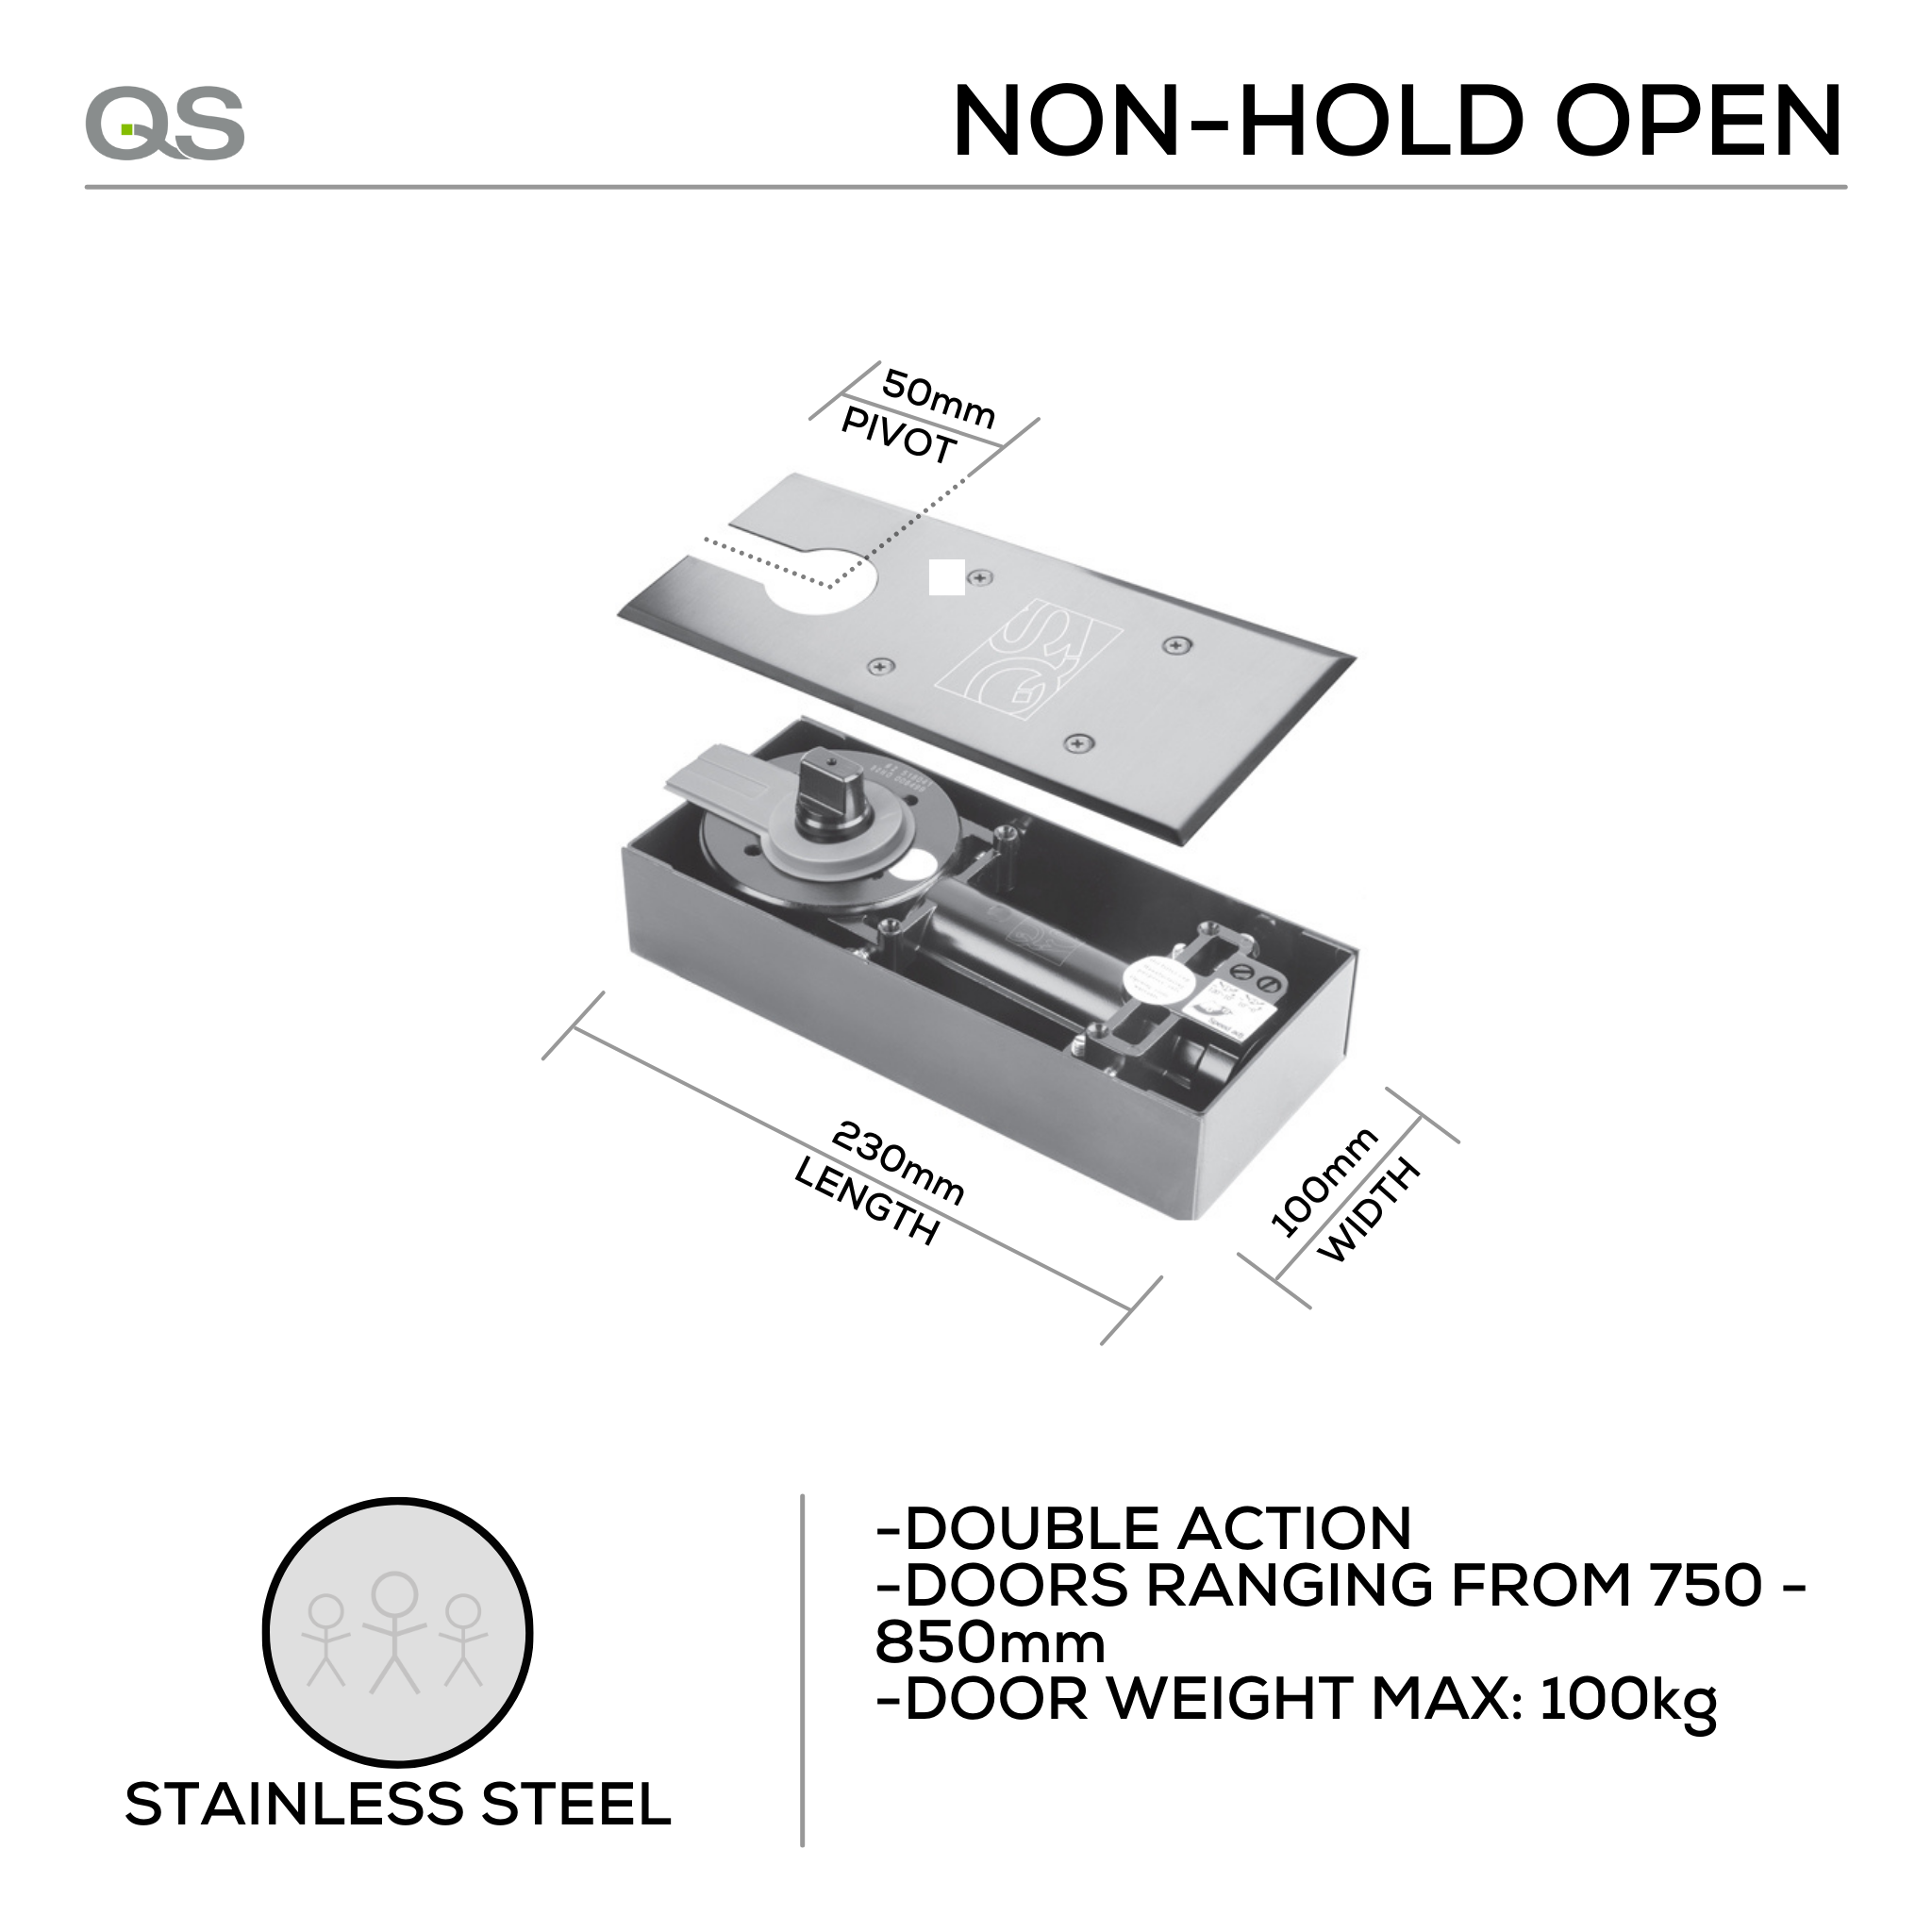 QS860 NHO, Floorspring, Double Action, Non-Hold Open, 100mm (kg), Top Centre, Bottom Strap, Stainless Steel, QS